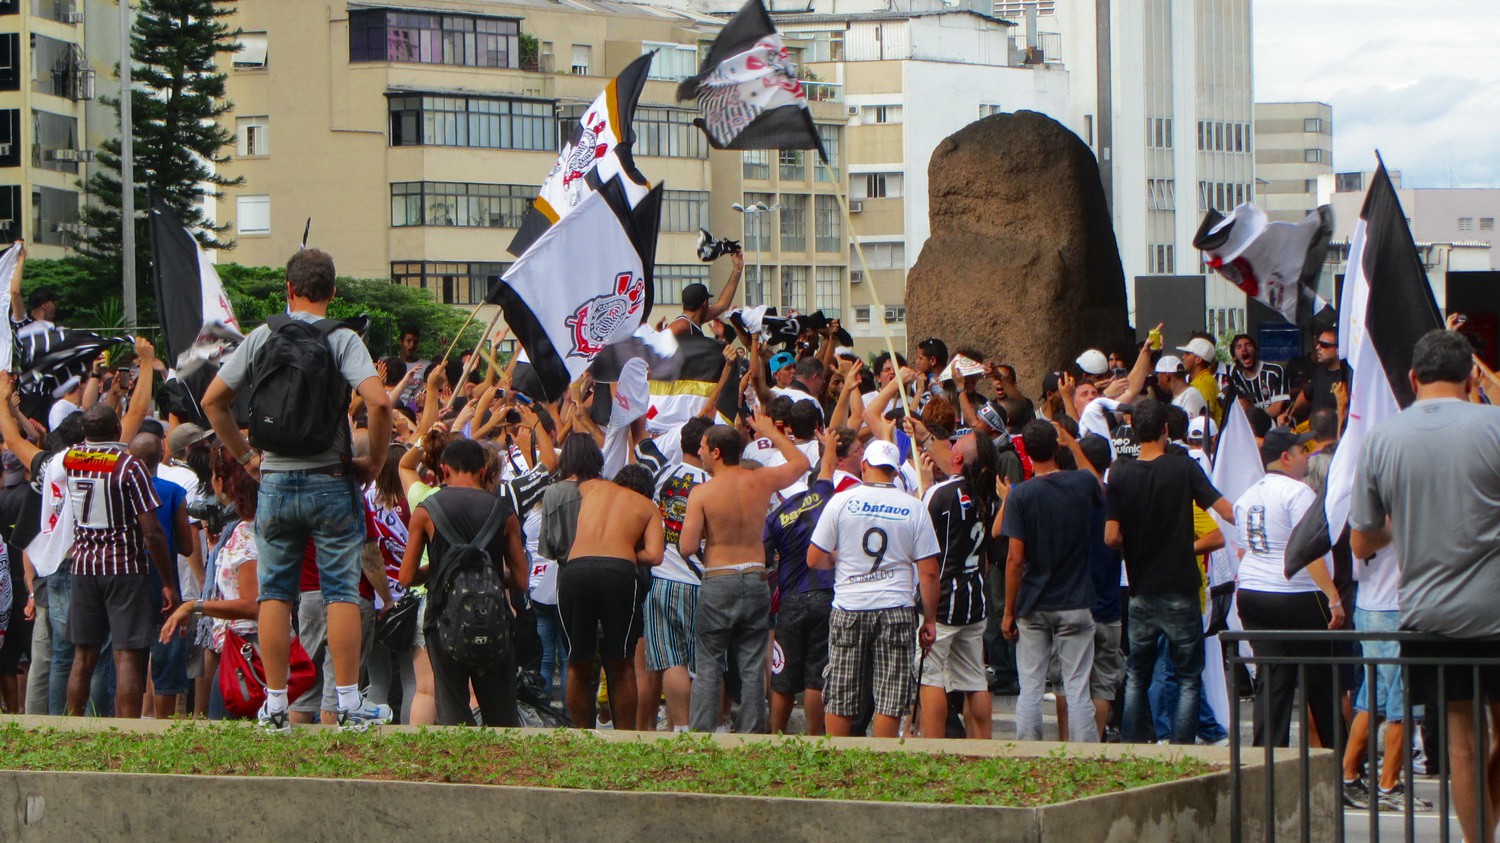 Celebrating fans of the football team Corinthians of Sao Paulo because it won the FIFA World Championship for clubs today (against Chelsea)